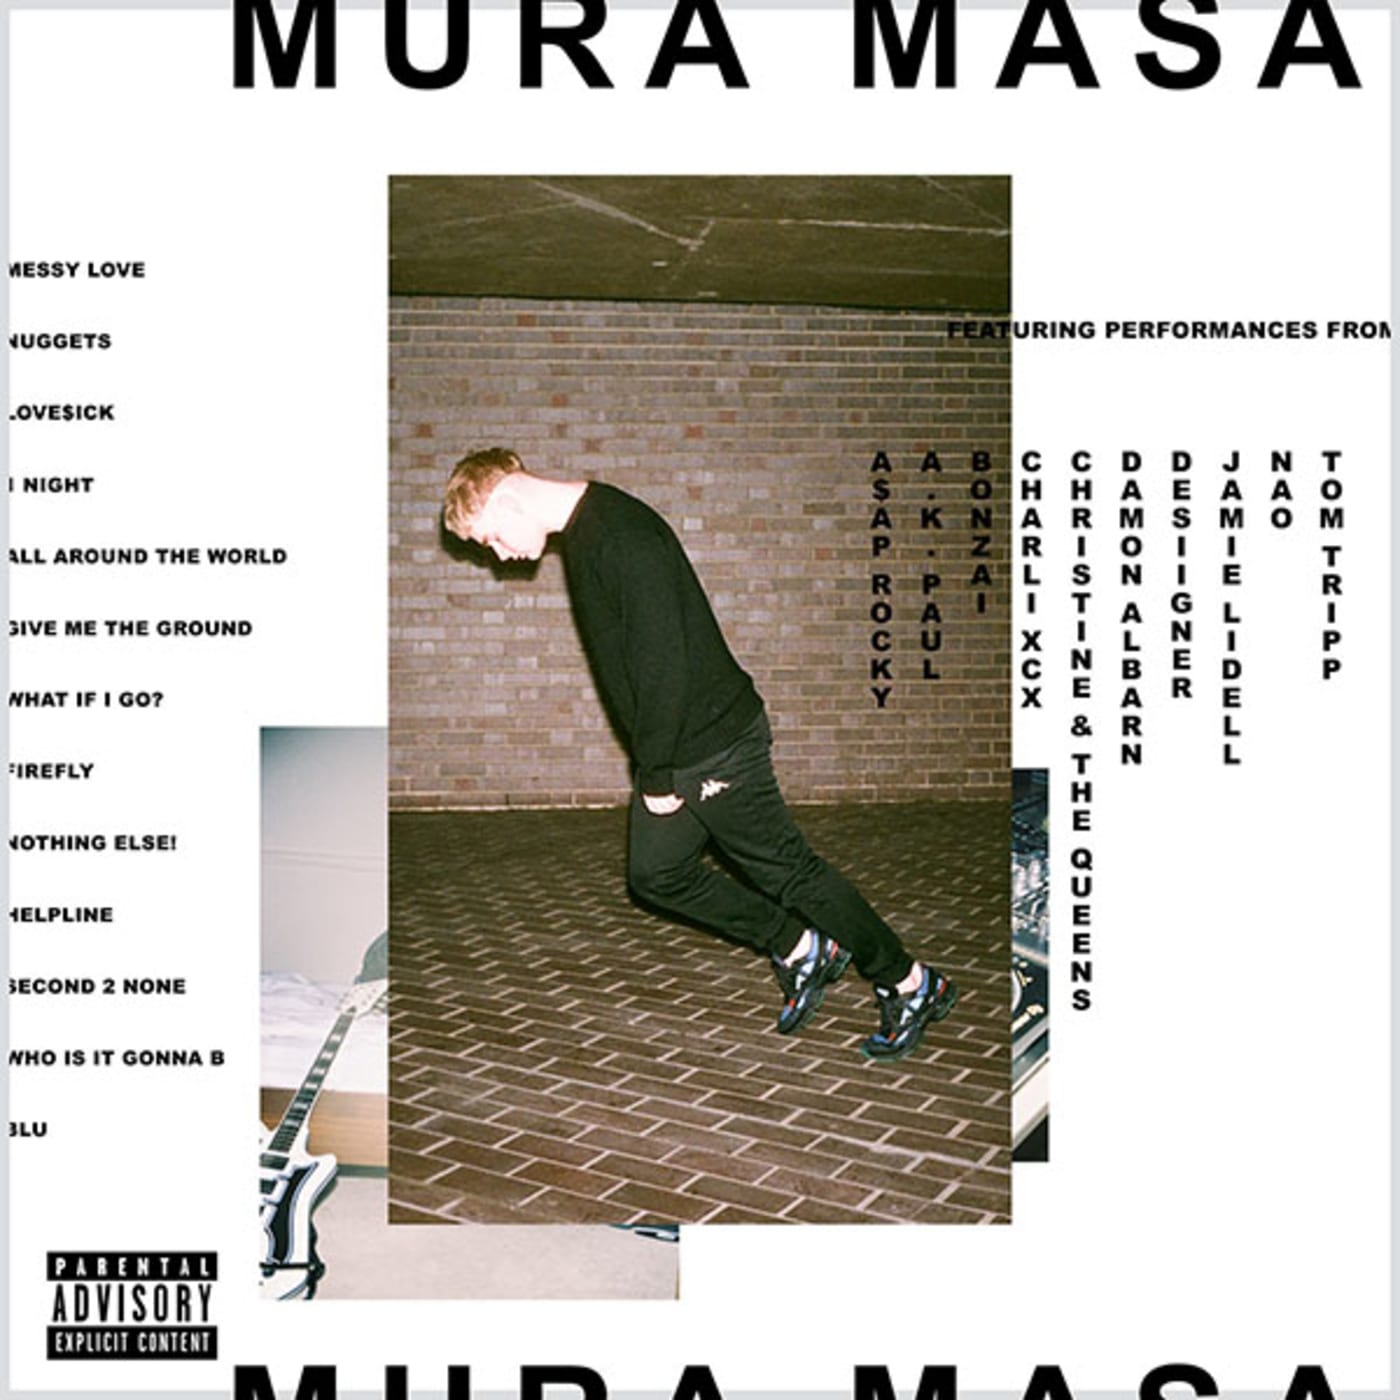 This is a photo of Mura Masa.